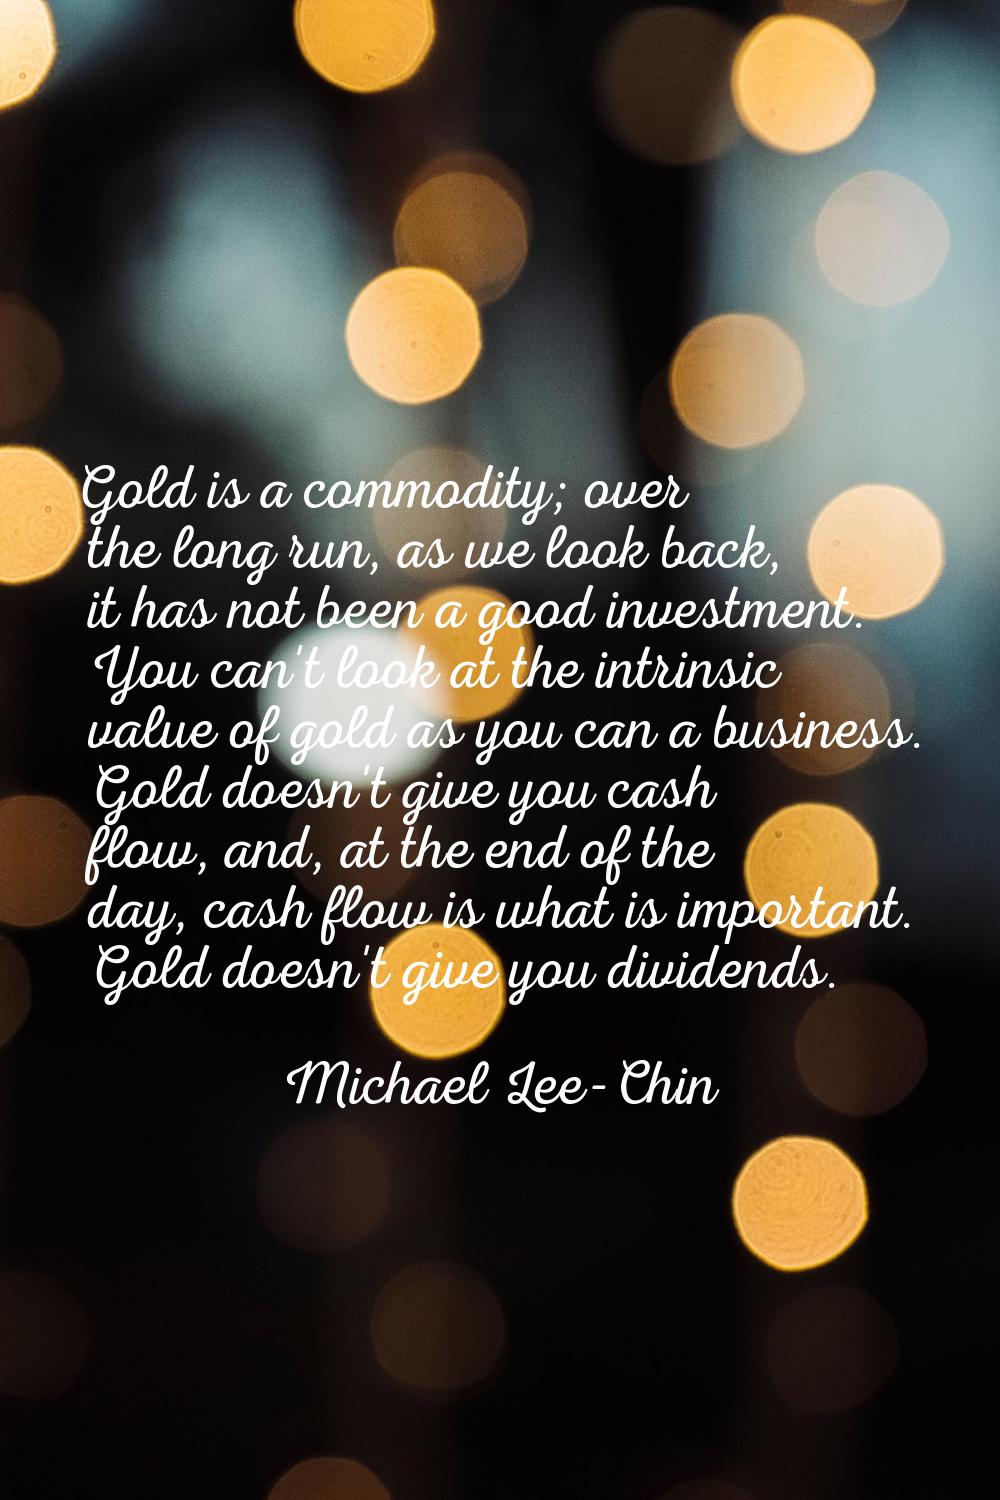 Gold is a commodity; over the long run, as we look back, it has not been a good investment. You can